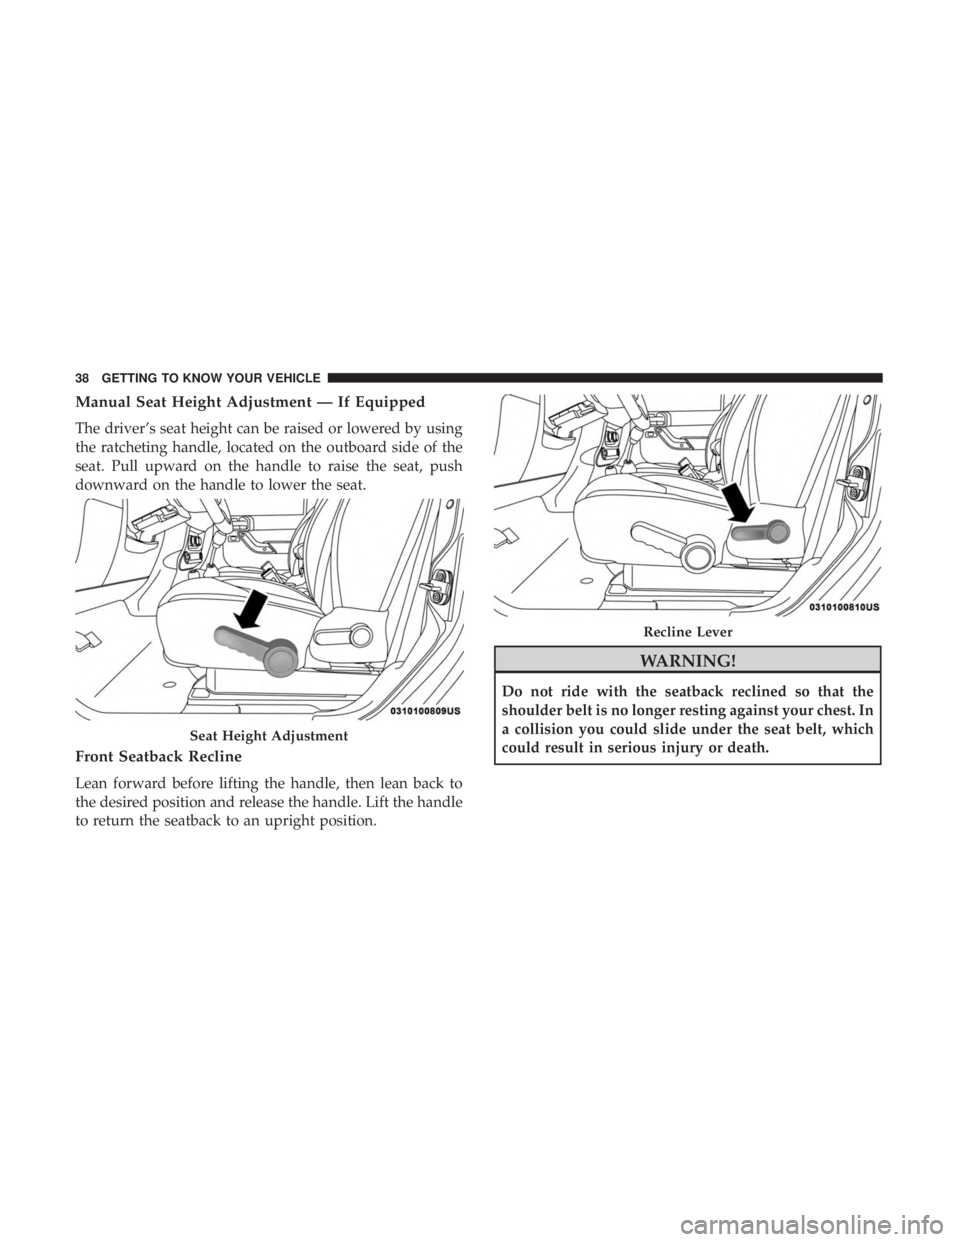 JEEP WRANGLER UNLIMITED 2017 Owners Guide Manual Seat Height Adjustment — If Equipped
The driver’s seat height can be raised or lowered by using
the ratcheting handle, located on the outboard side of the
seat. Pull upward on the handle to